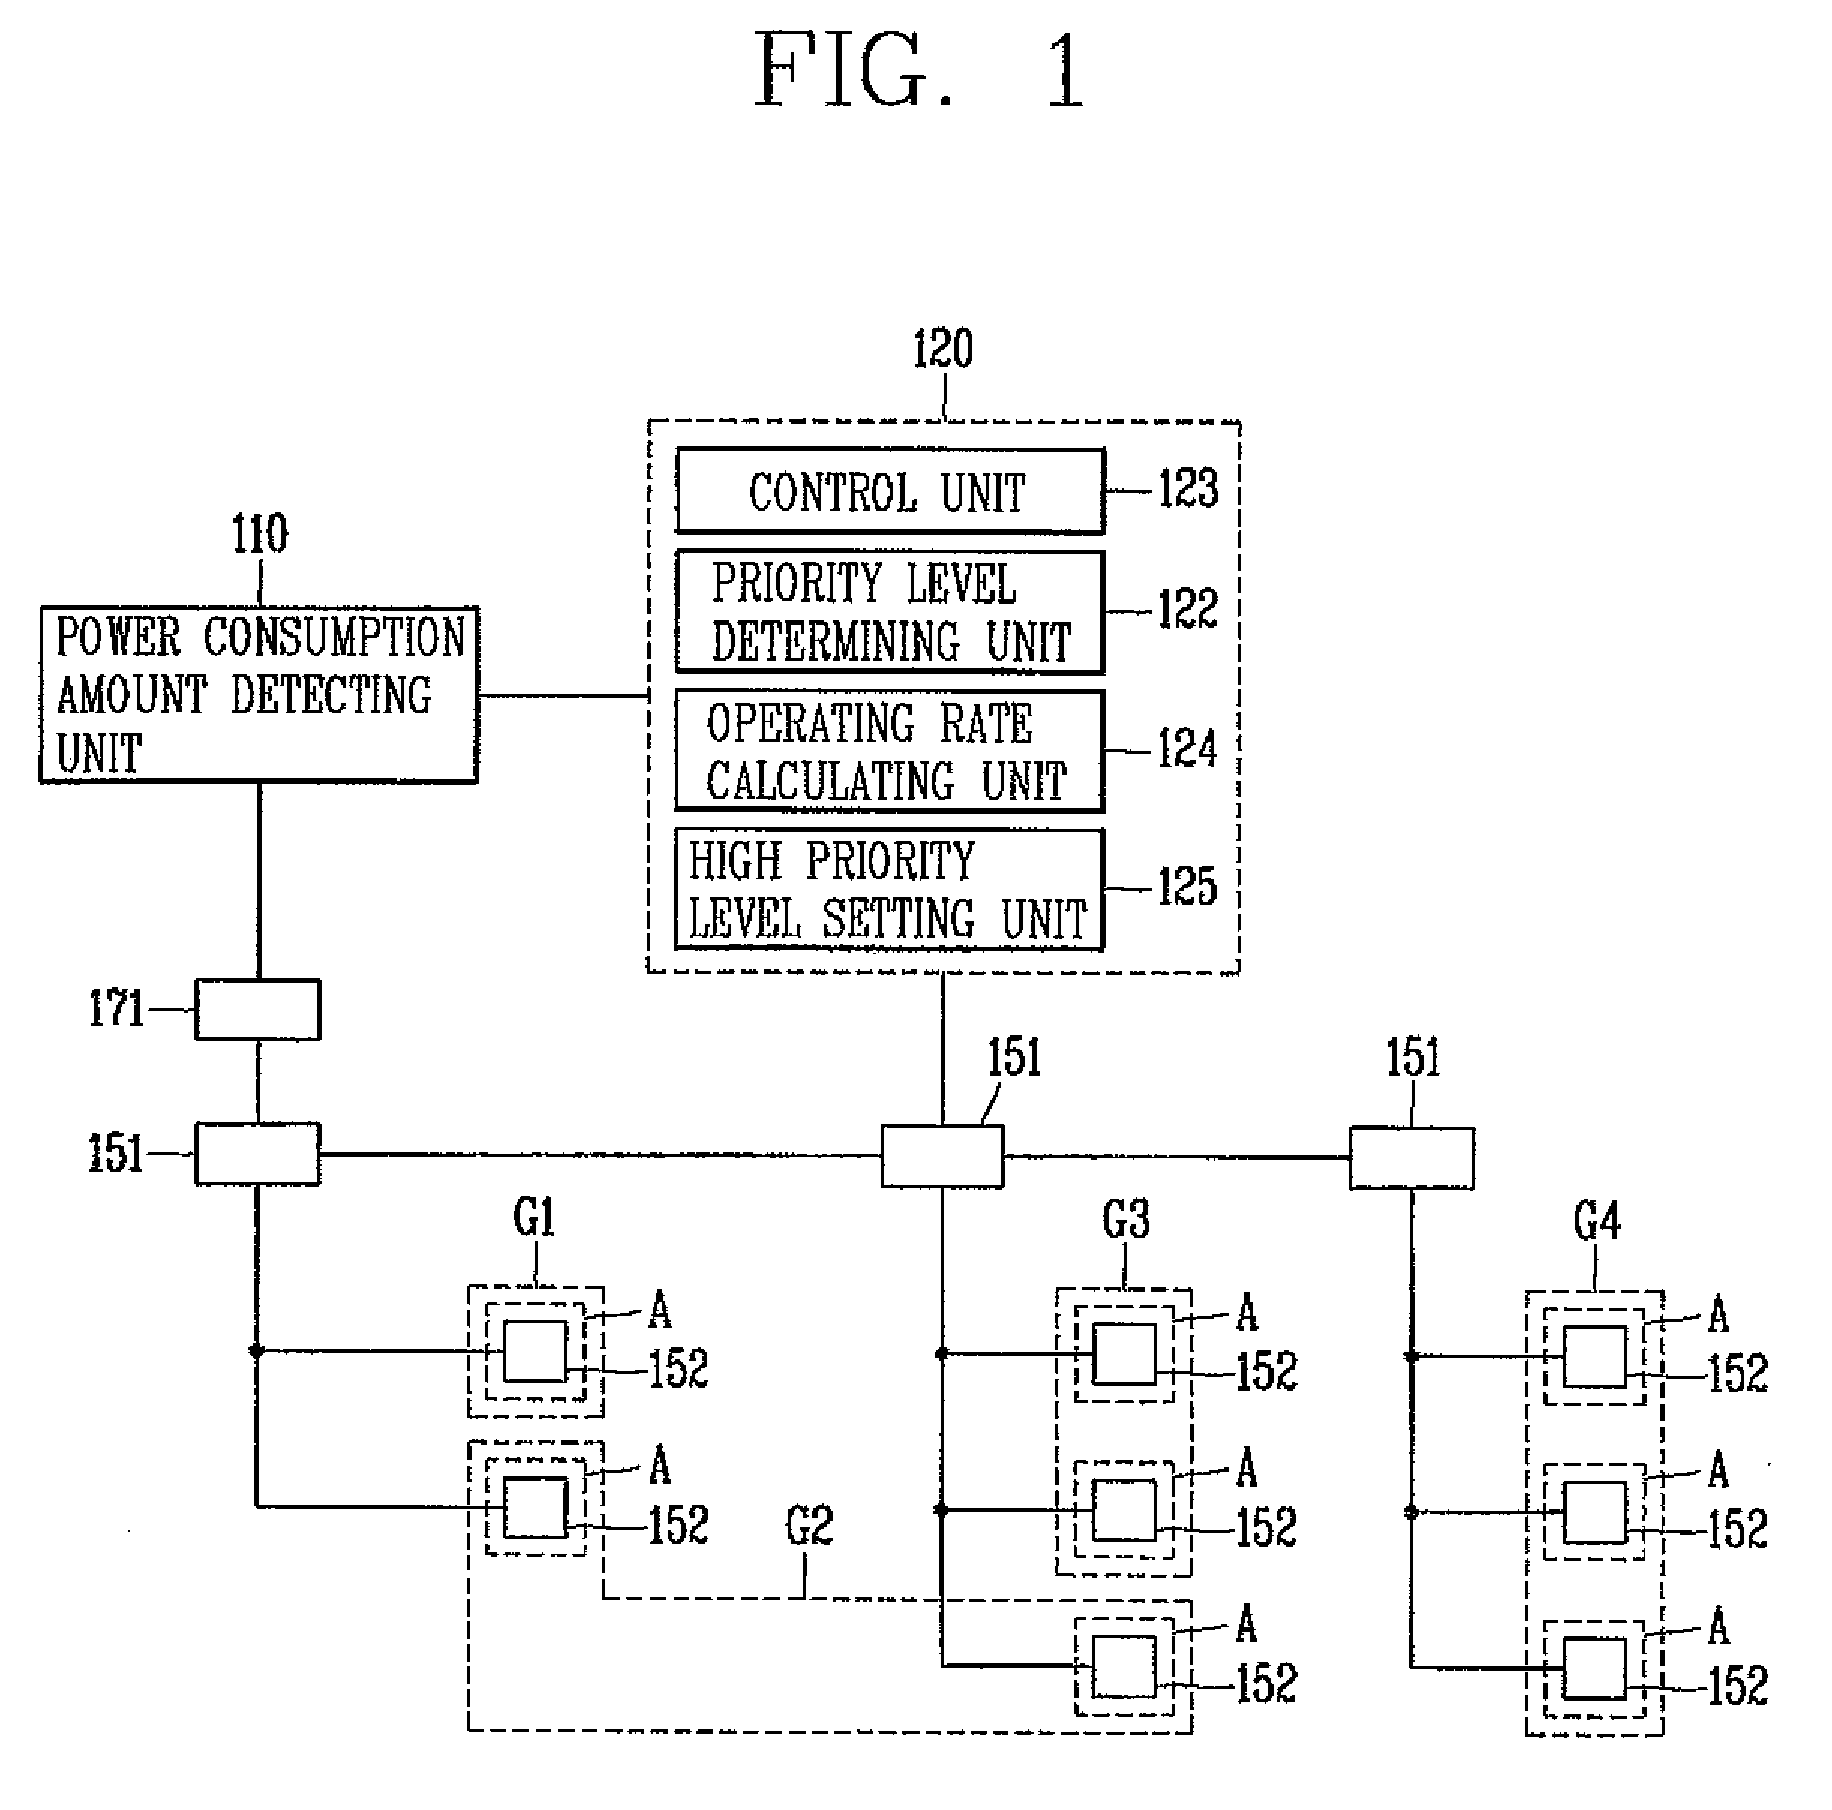 System and method for controlling demand of multi-air-conditioner